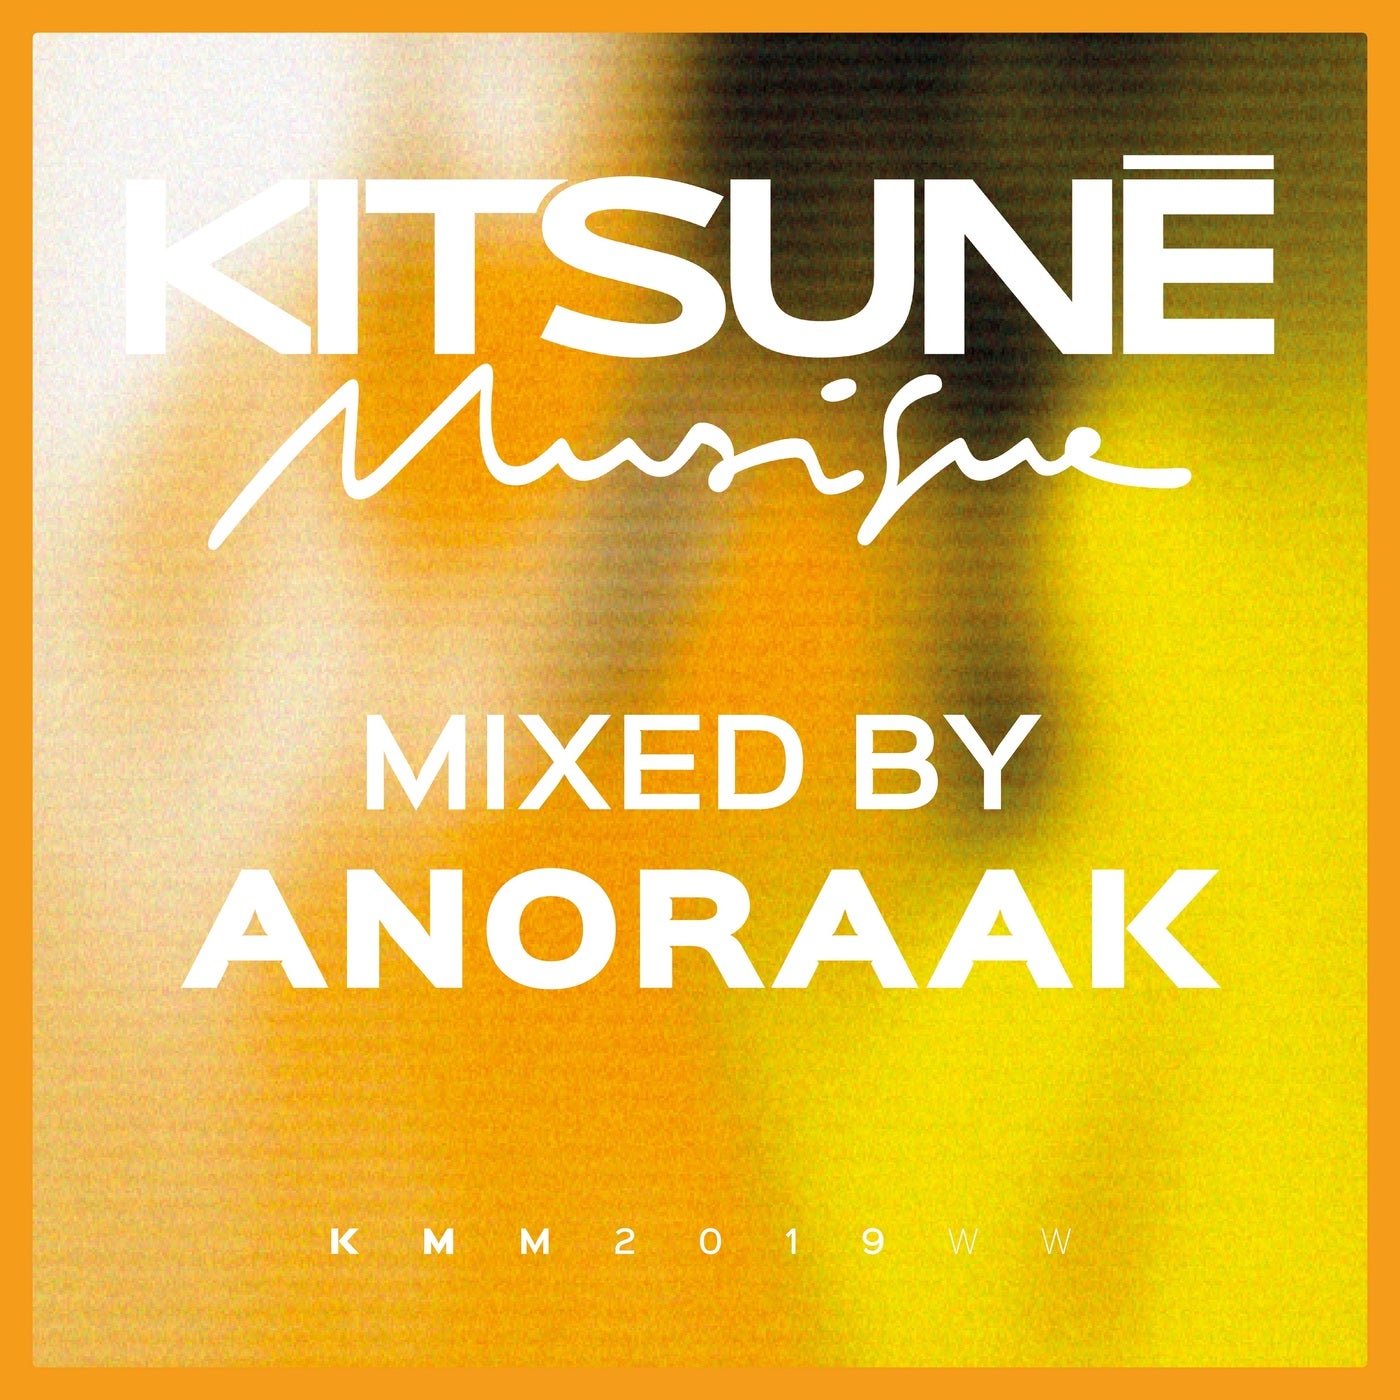 Kitsune Musique Mixed by Anoraak (DJ Mix)